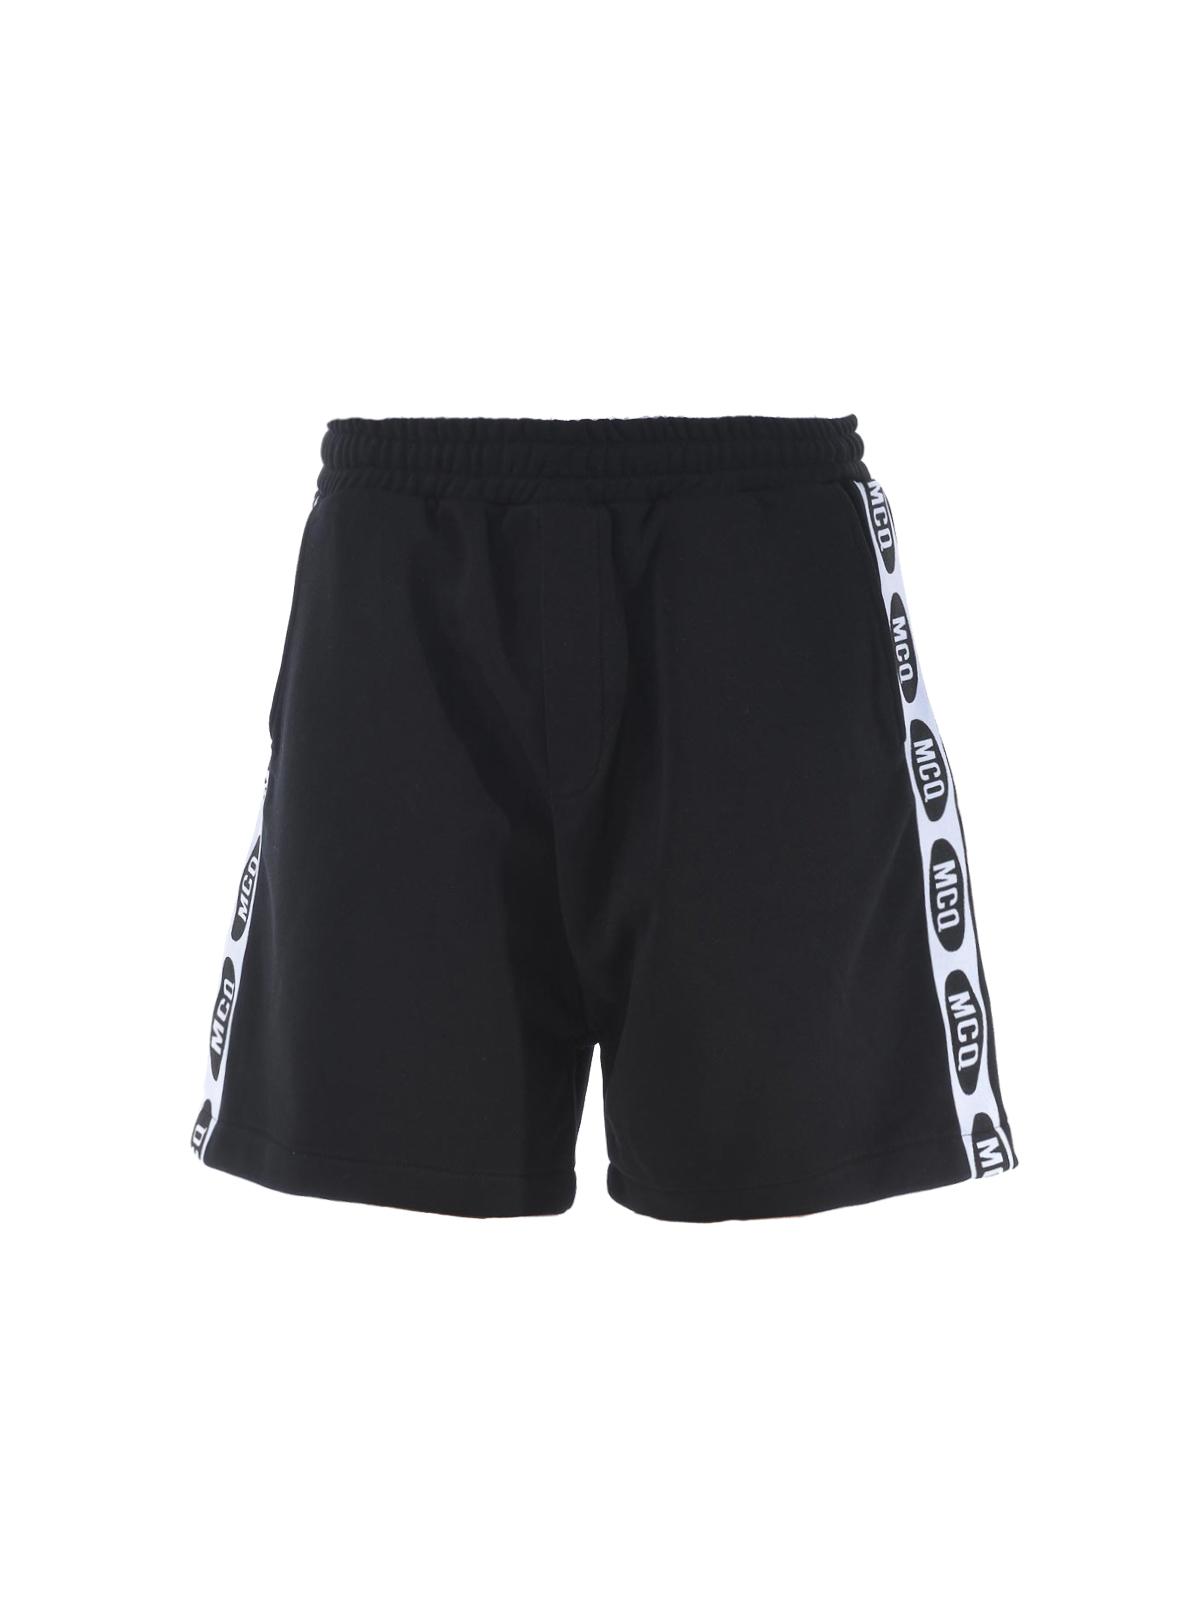 McQ Black Cotton Shorts With Branded Bands for Men - Lyst